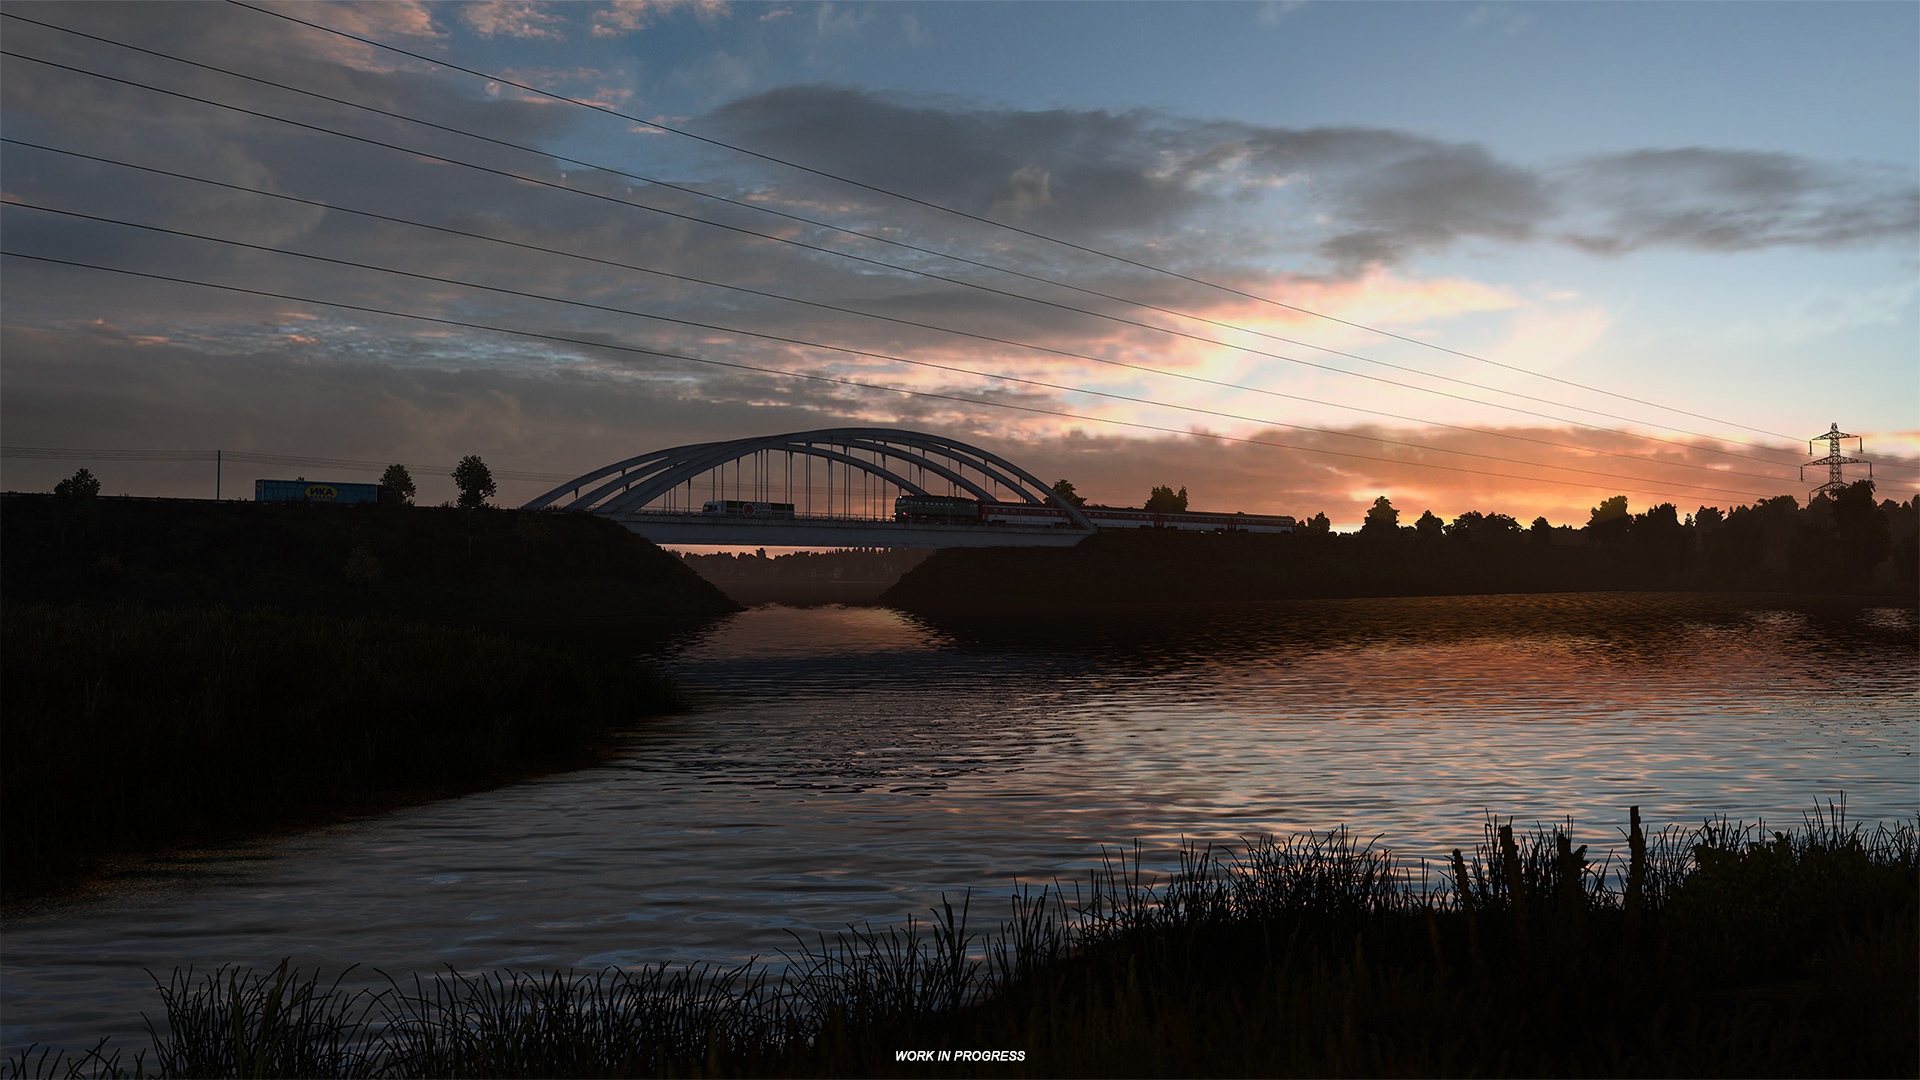 Euro Truck Simulator 2 devs show just how pretty Russian water can be